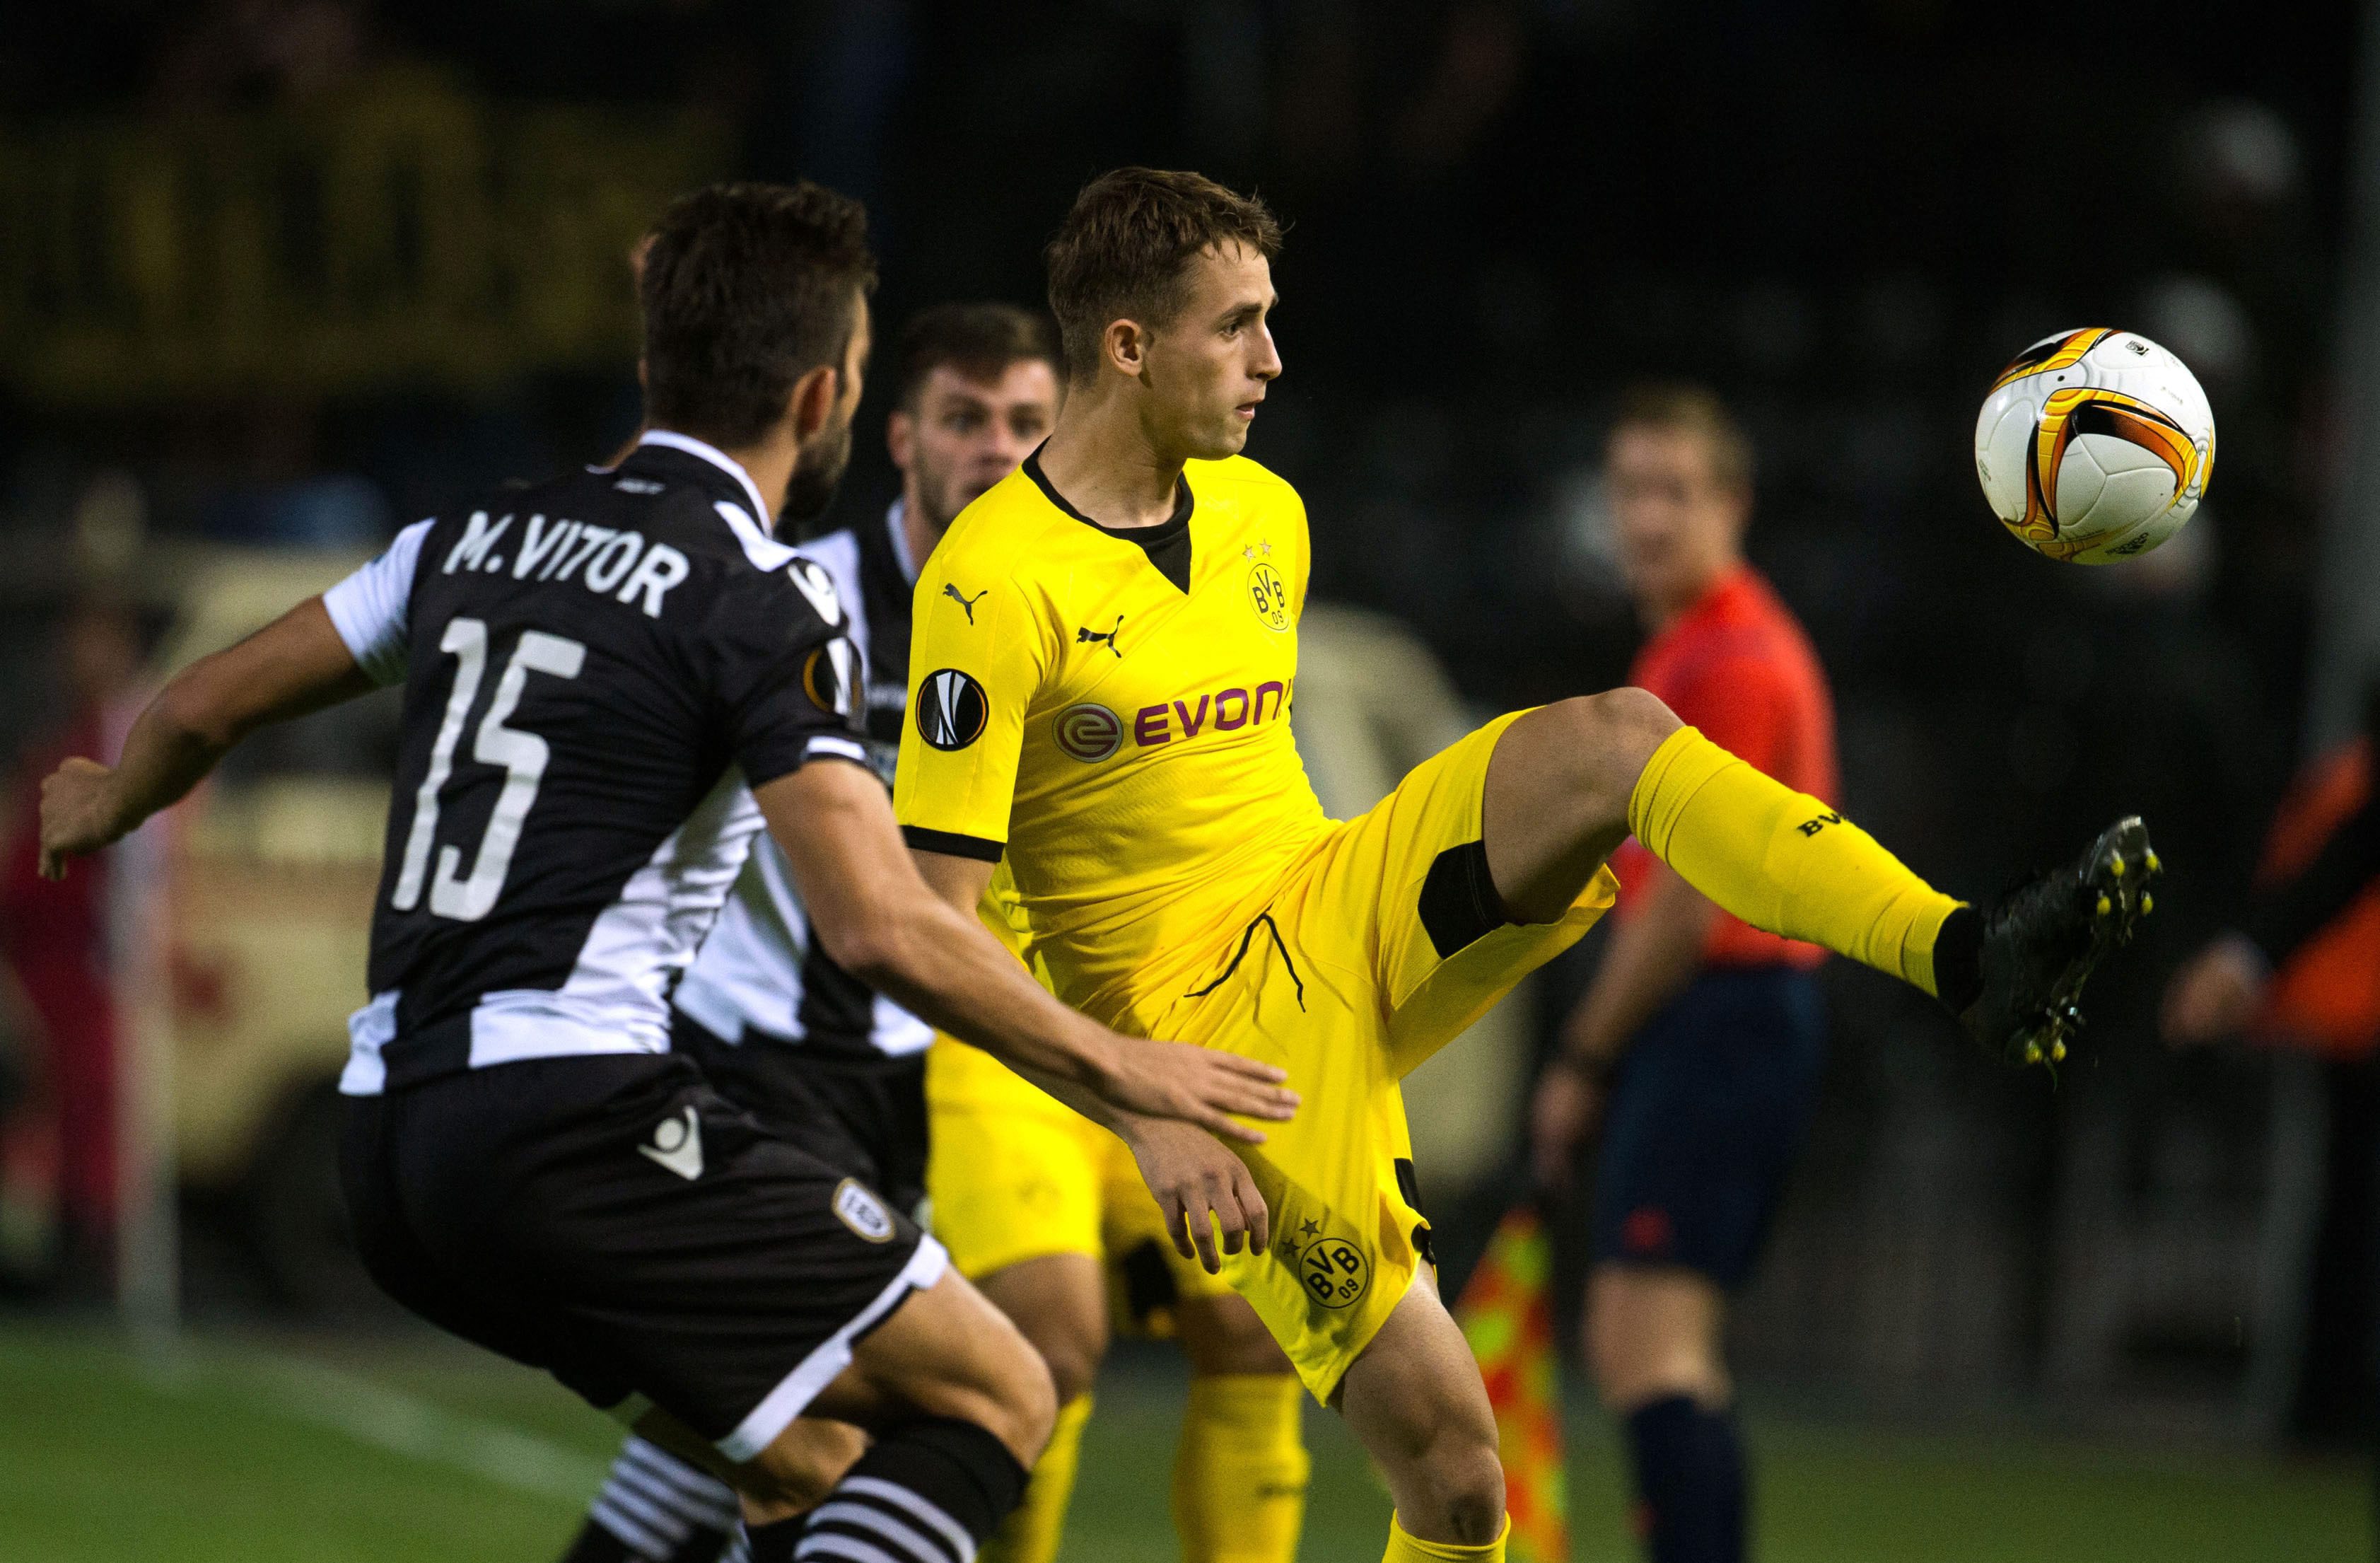 Adnan Januzaj was heavily criticised for his lack of intent at Borussia Dortmund as the Bundesliga club cut his season-long short after just six months.